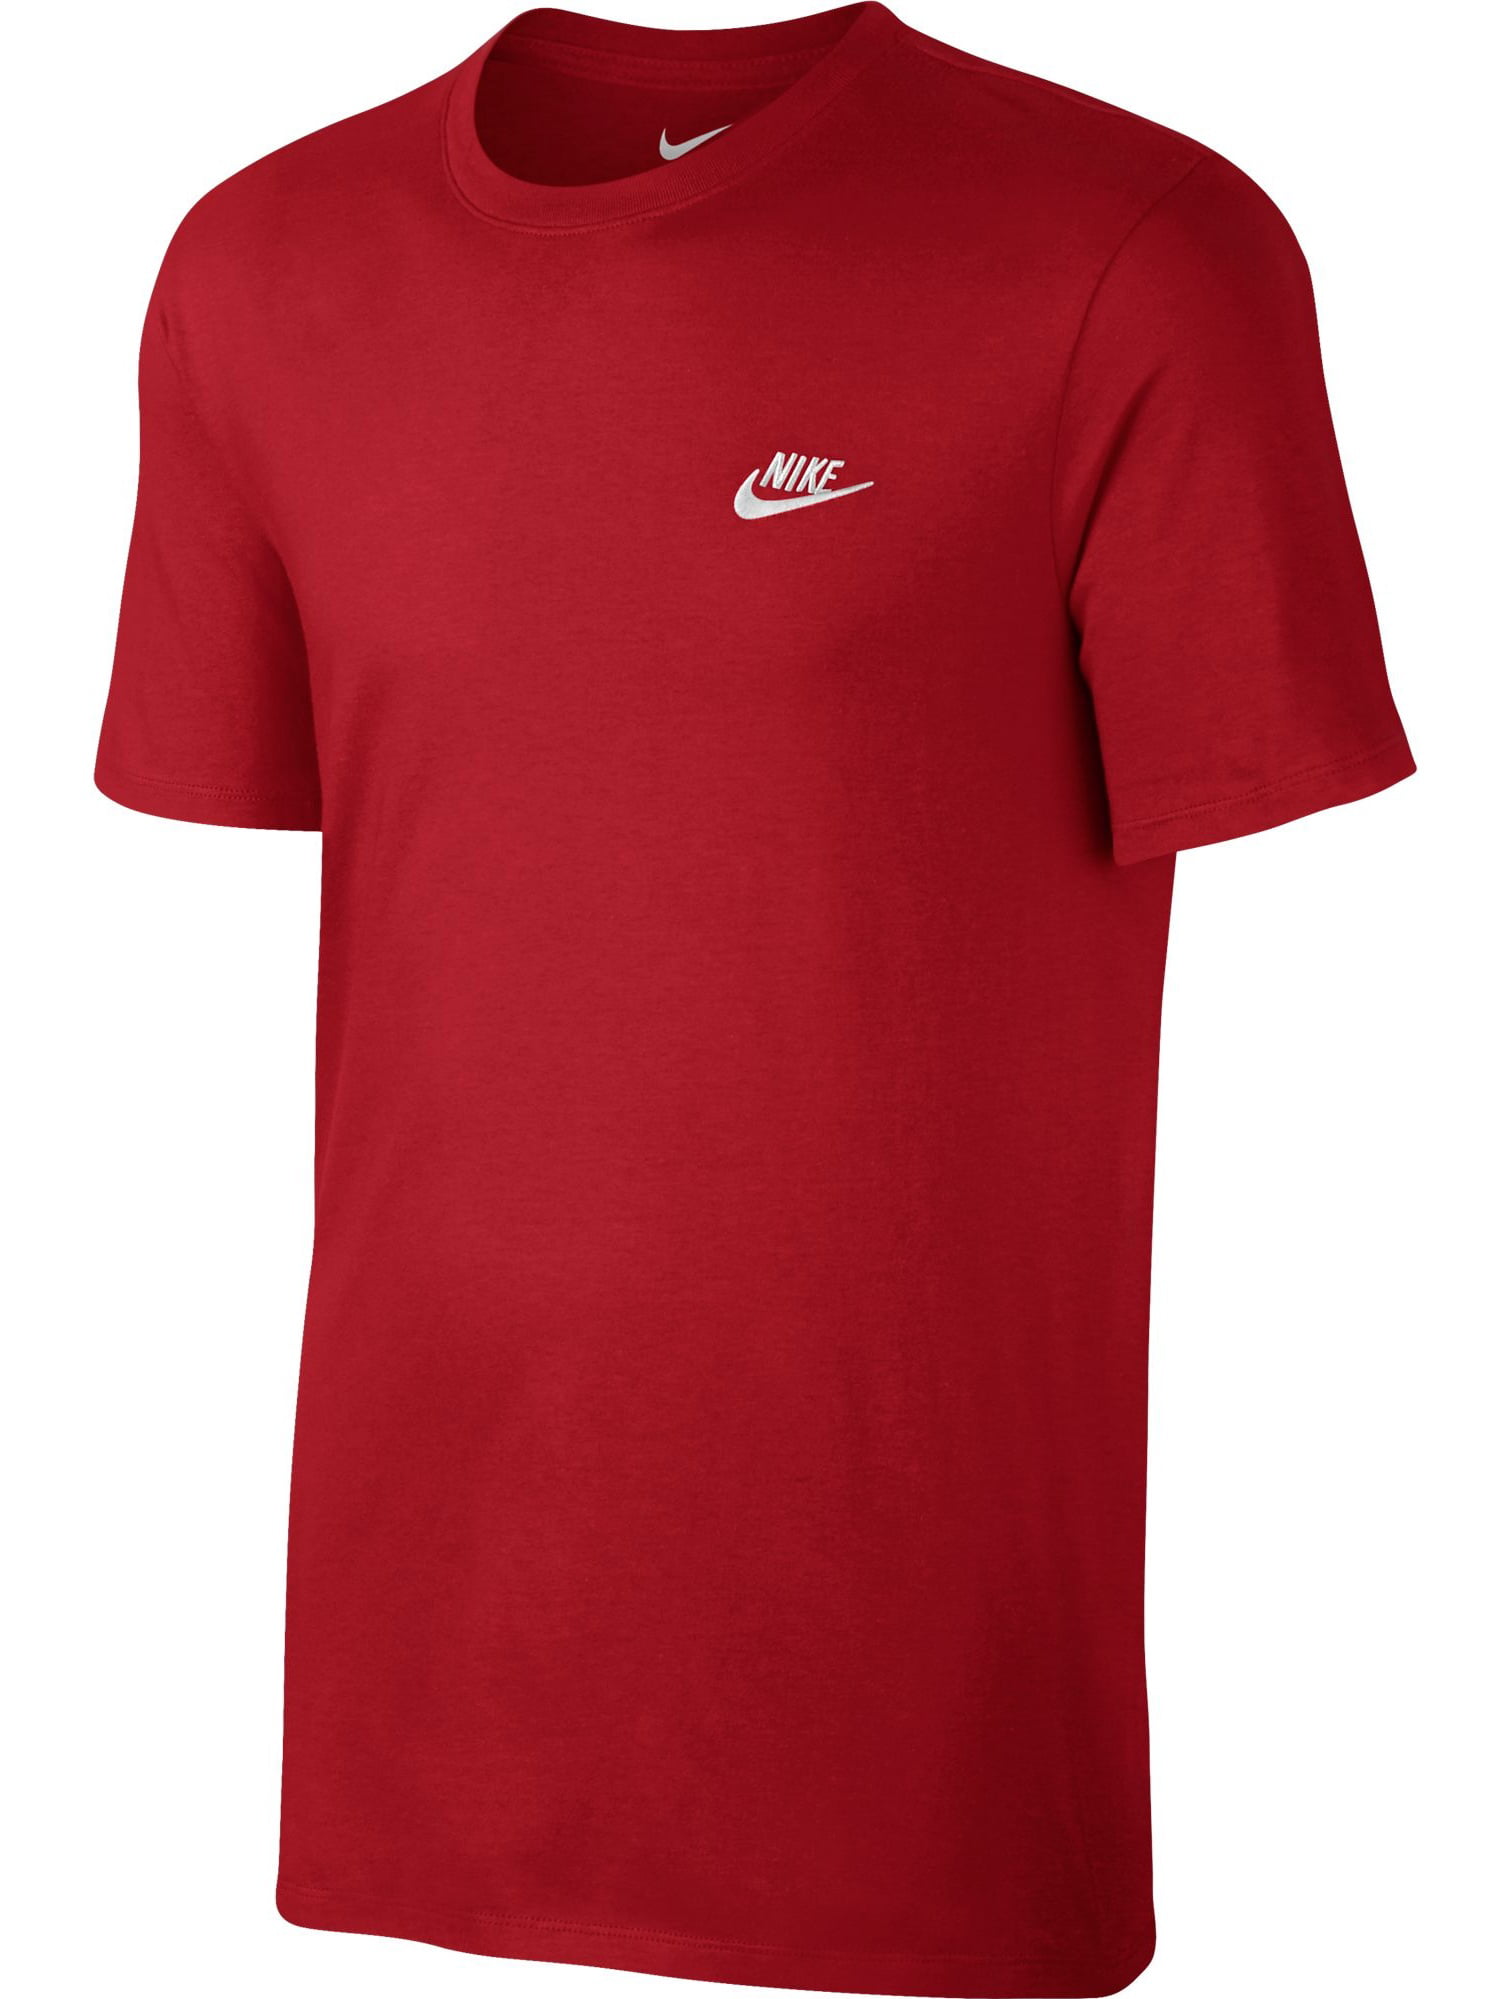 Nike - Nike Men's Embroidered Swoosh T-Shirt Red/White 827021-611 ...